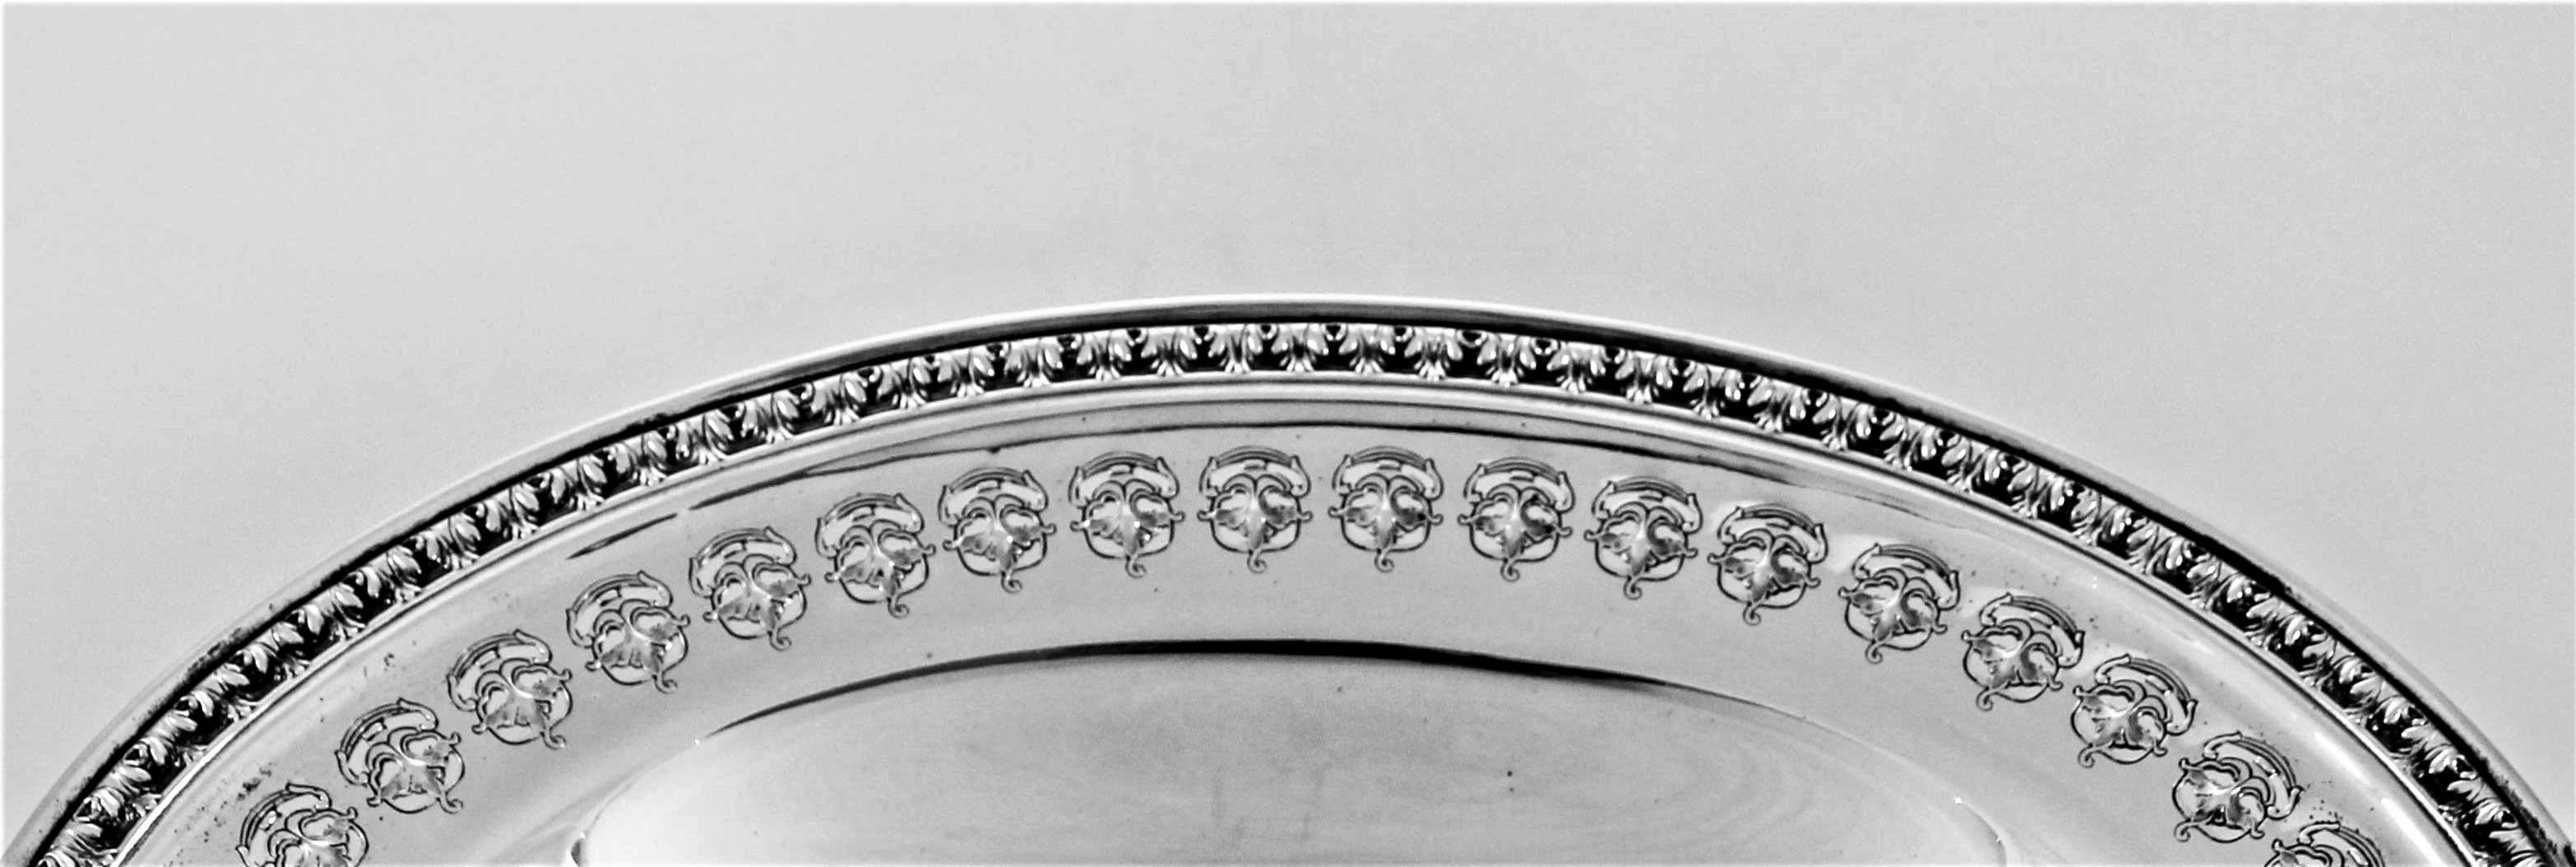 Proudly offering this sterling silver bowl made by William Durgin Silver Company. It has oval-shaped handles on each end and stands on a centre pedestal (not weighted). Along the base and bowl rim a decorative pattern goes around the entire